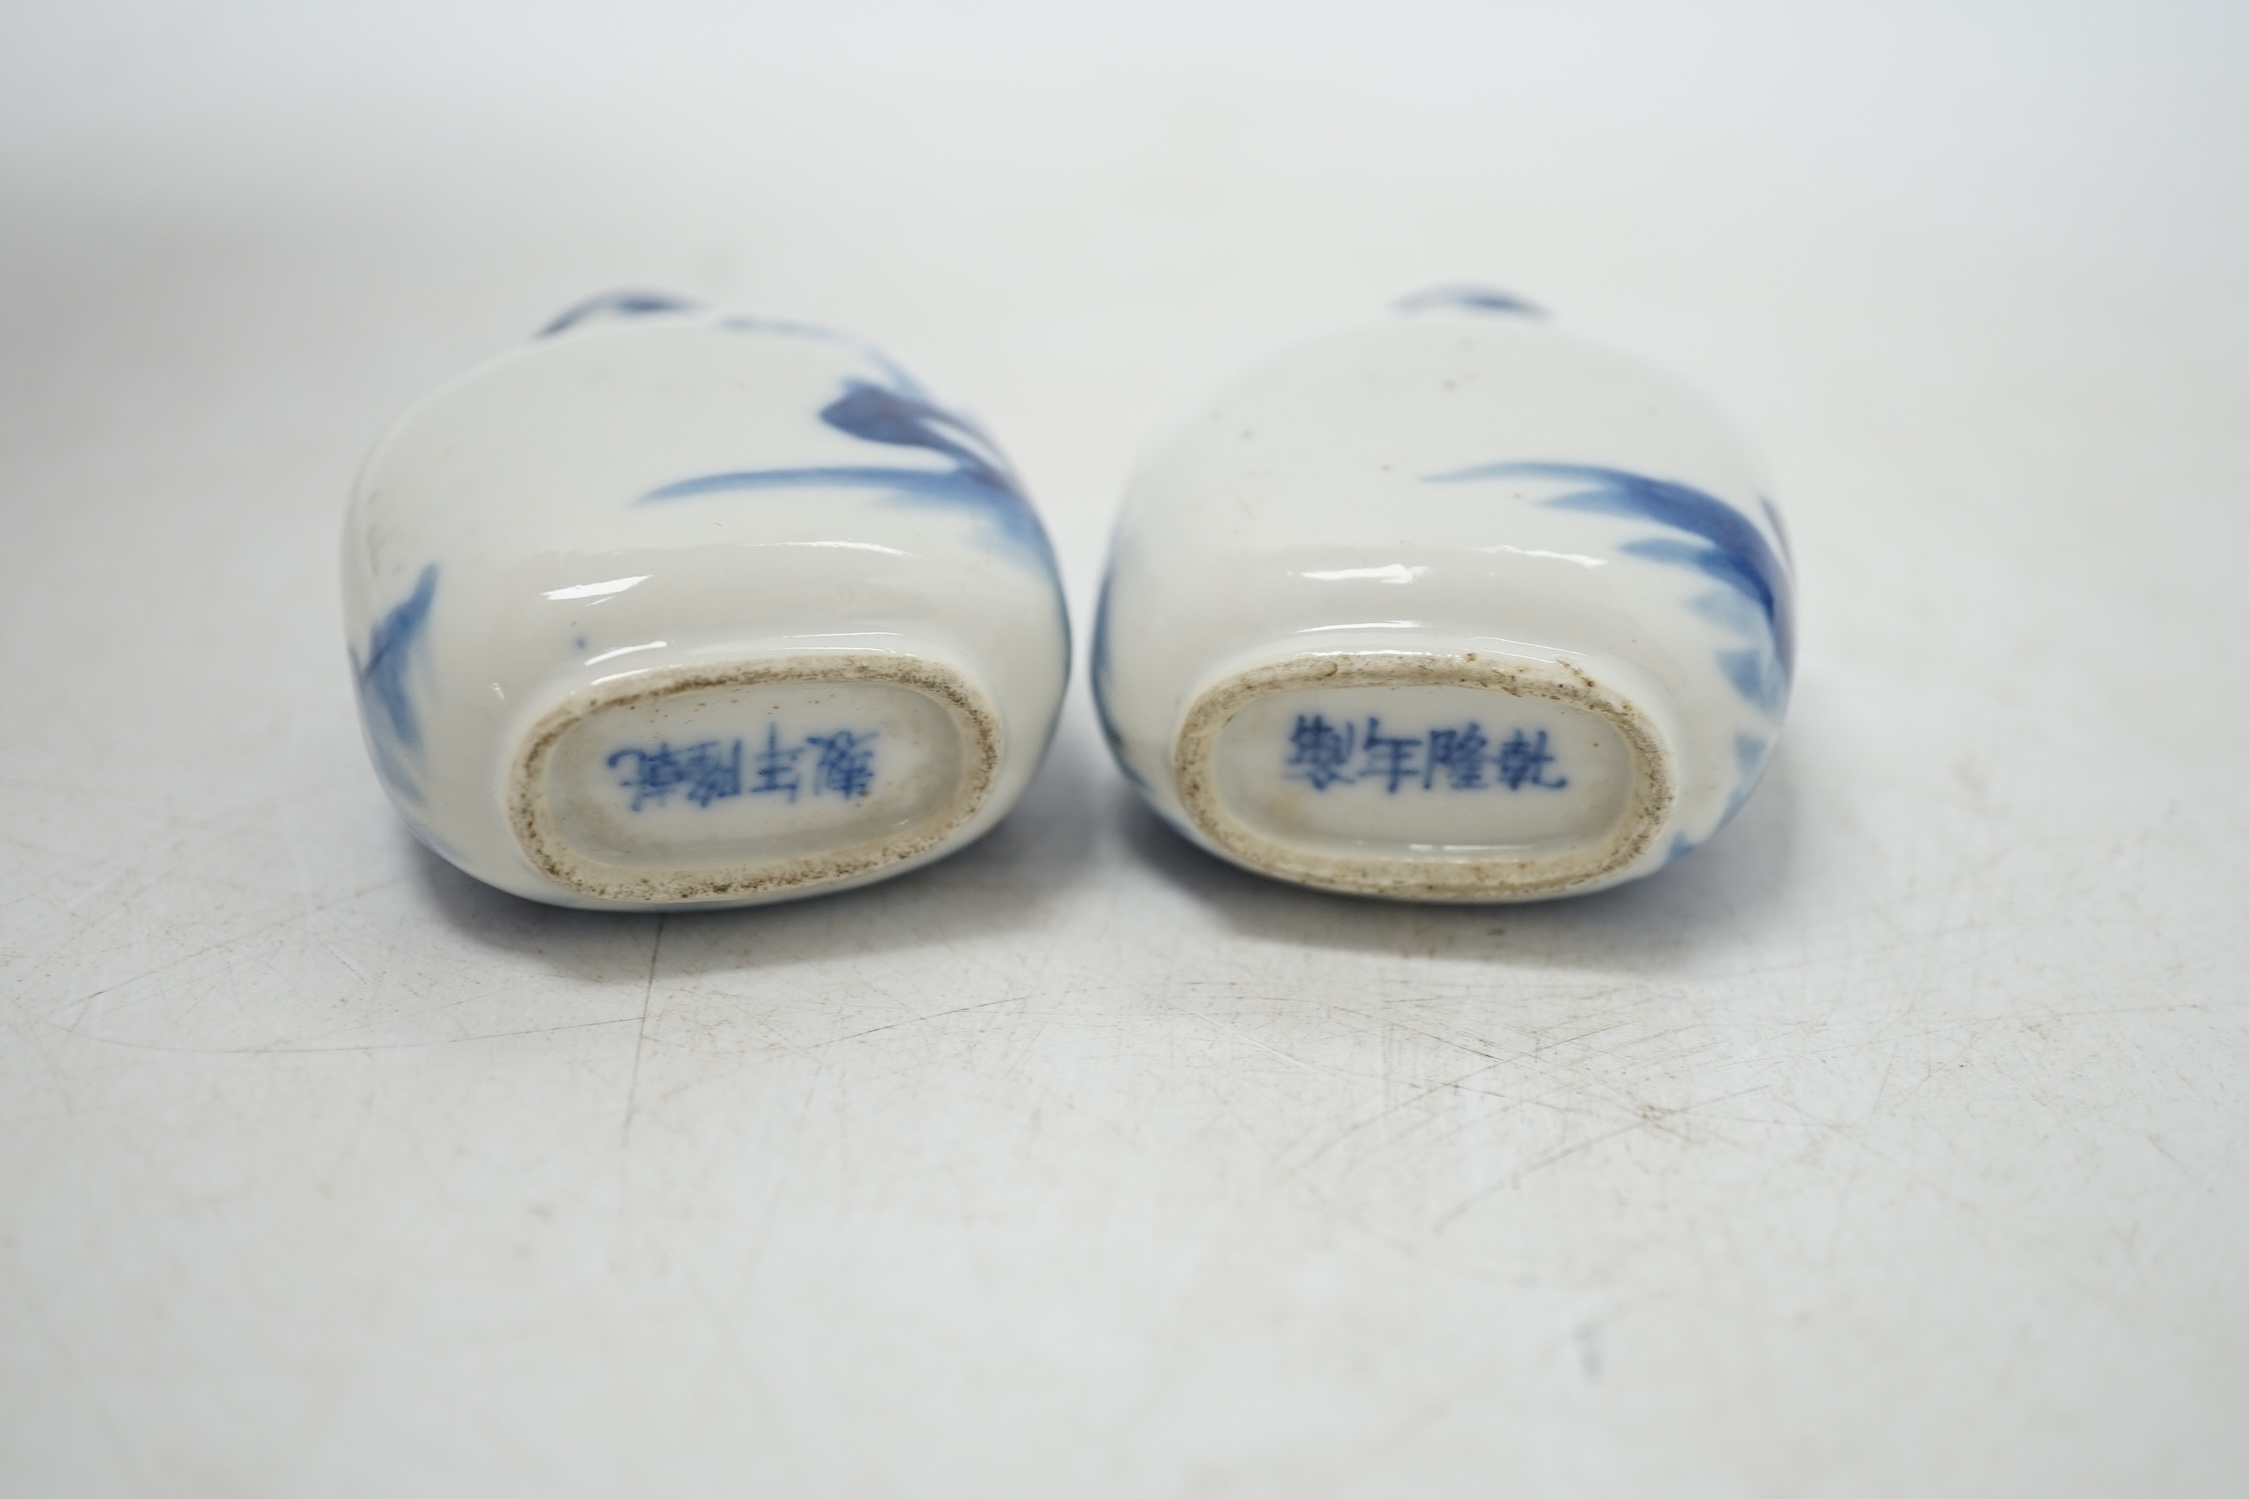 Two Chinese blue and white snuff bottles decorated with figures, largest 6cm high. Condition - fair